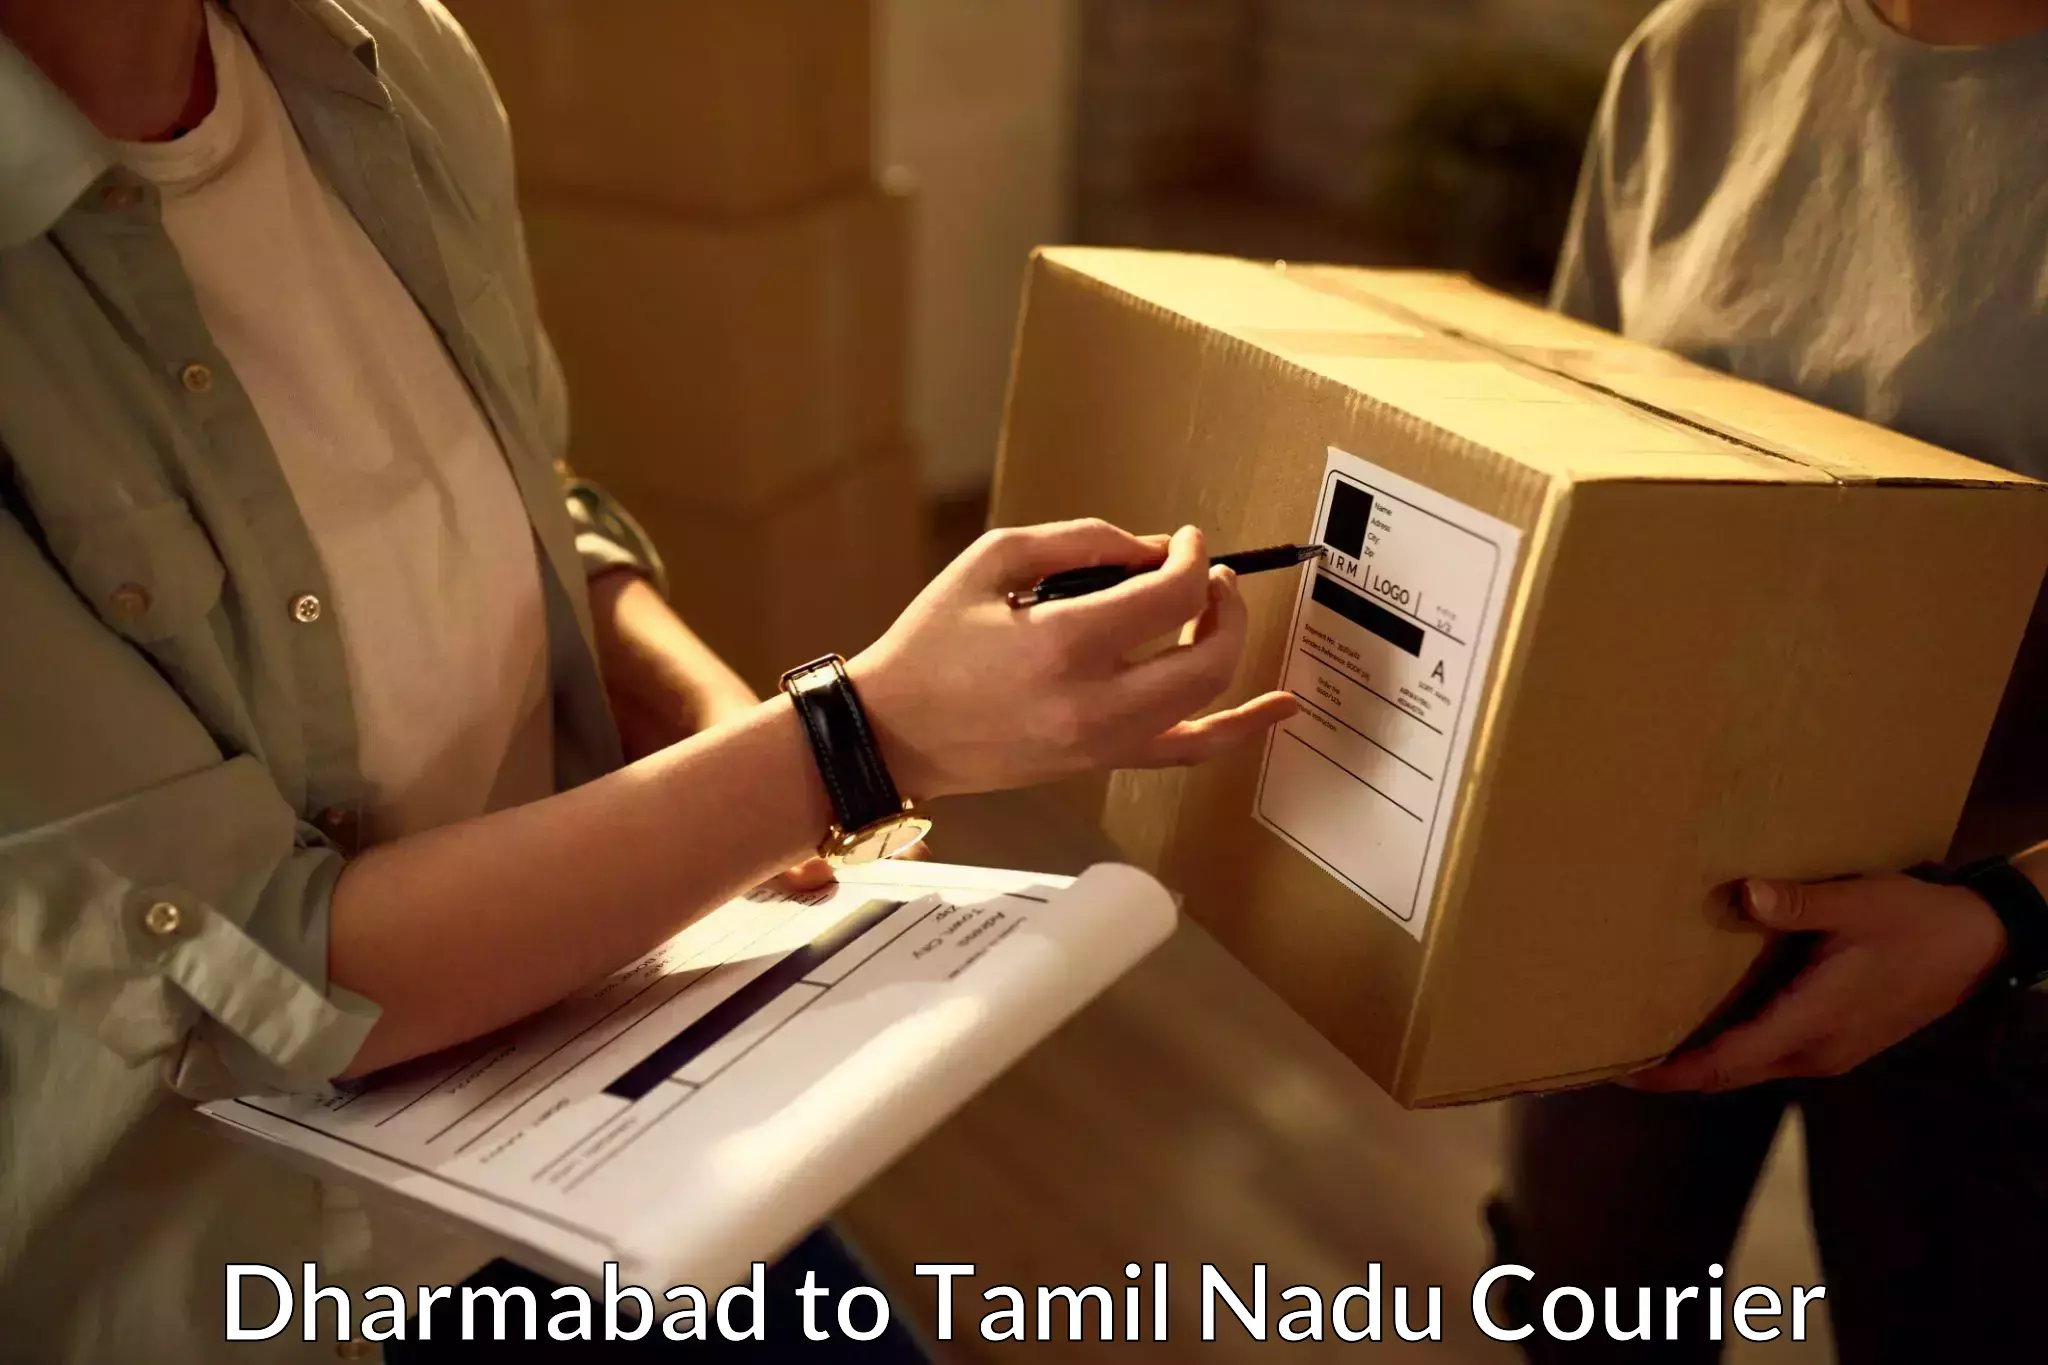 Courier app Dharmabad to Chidambaram